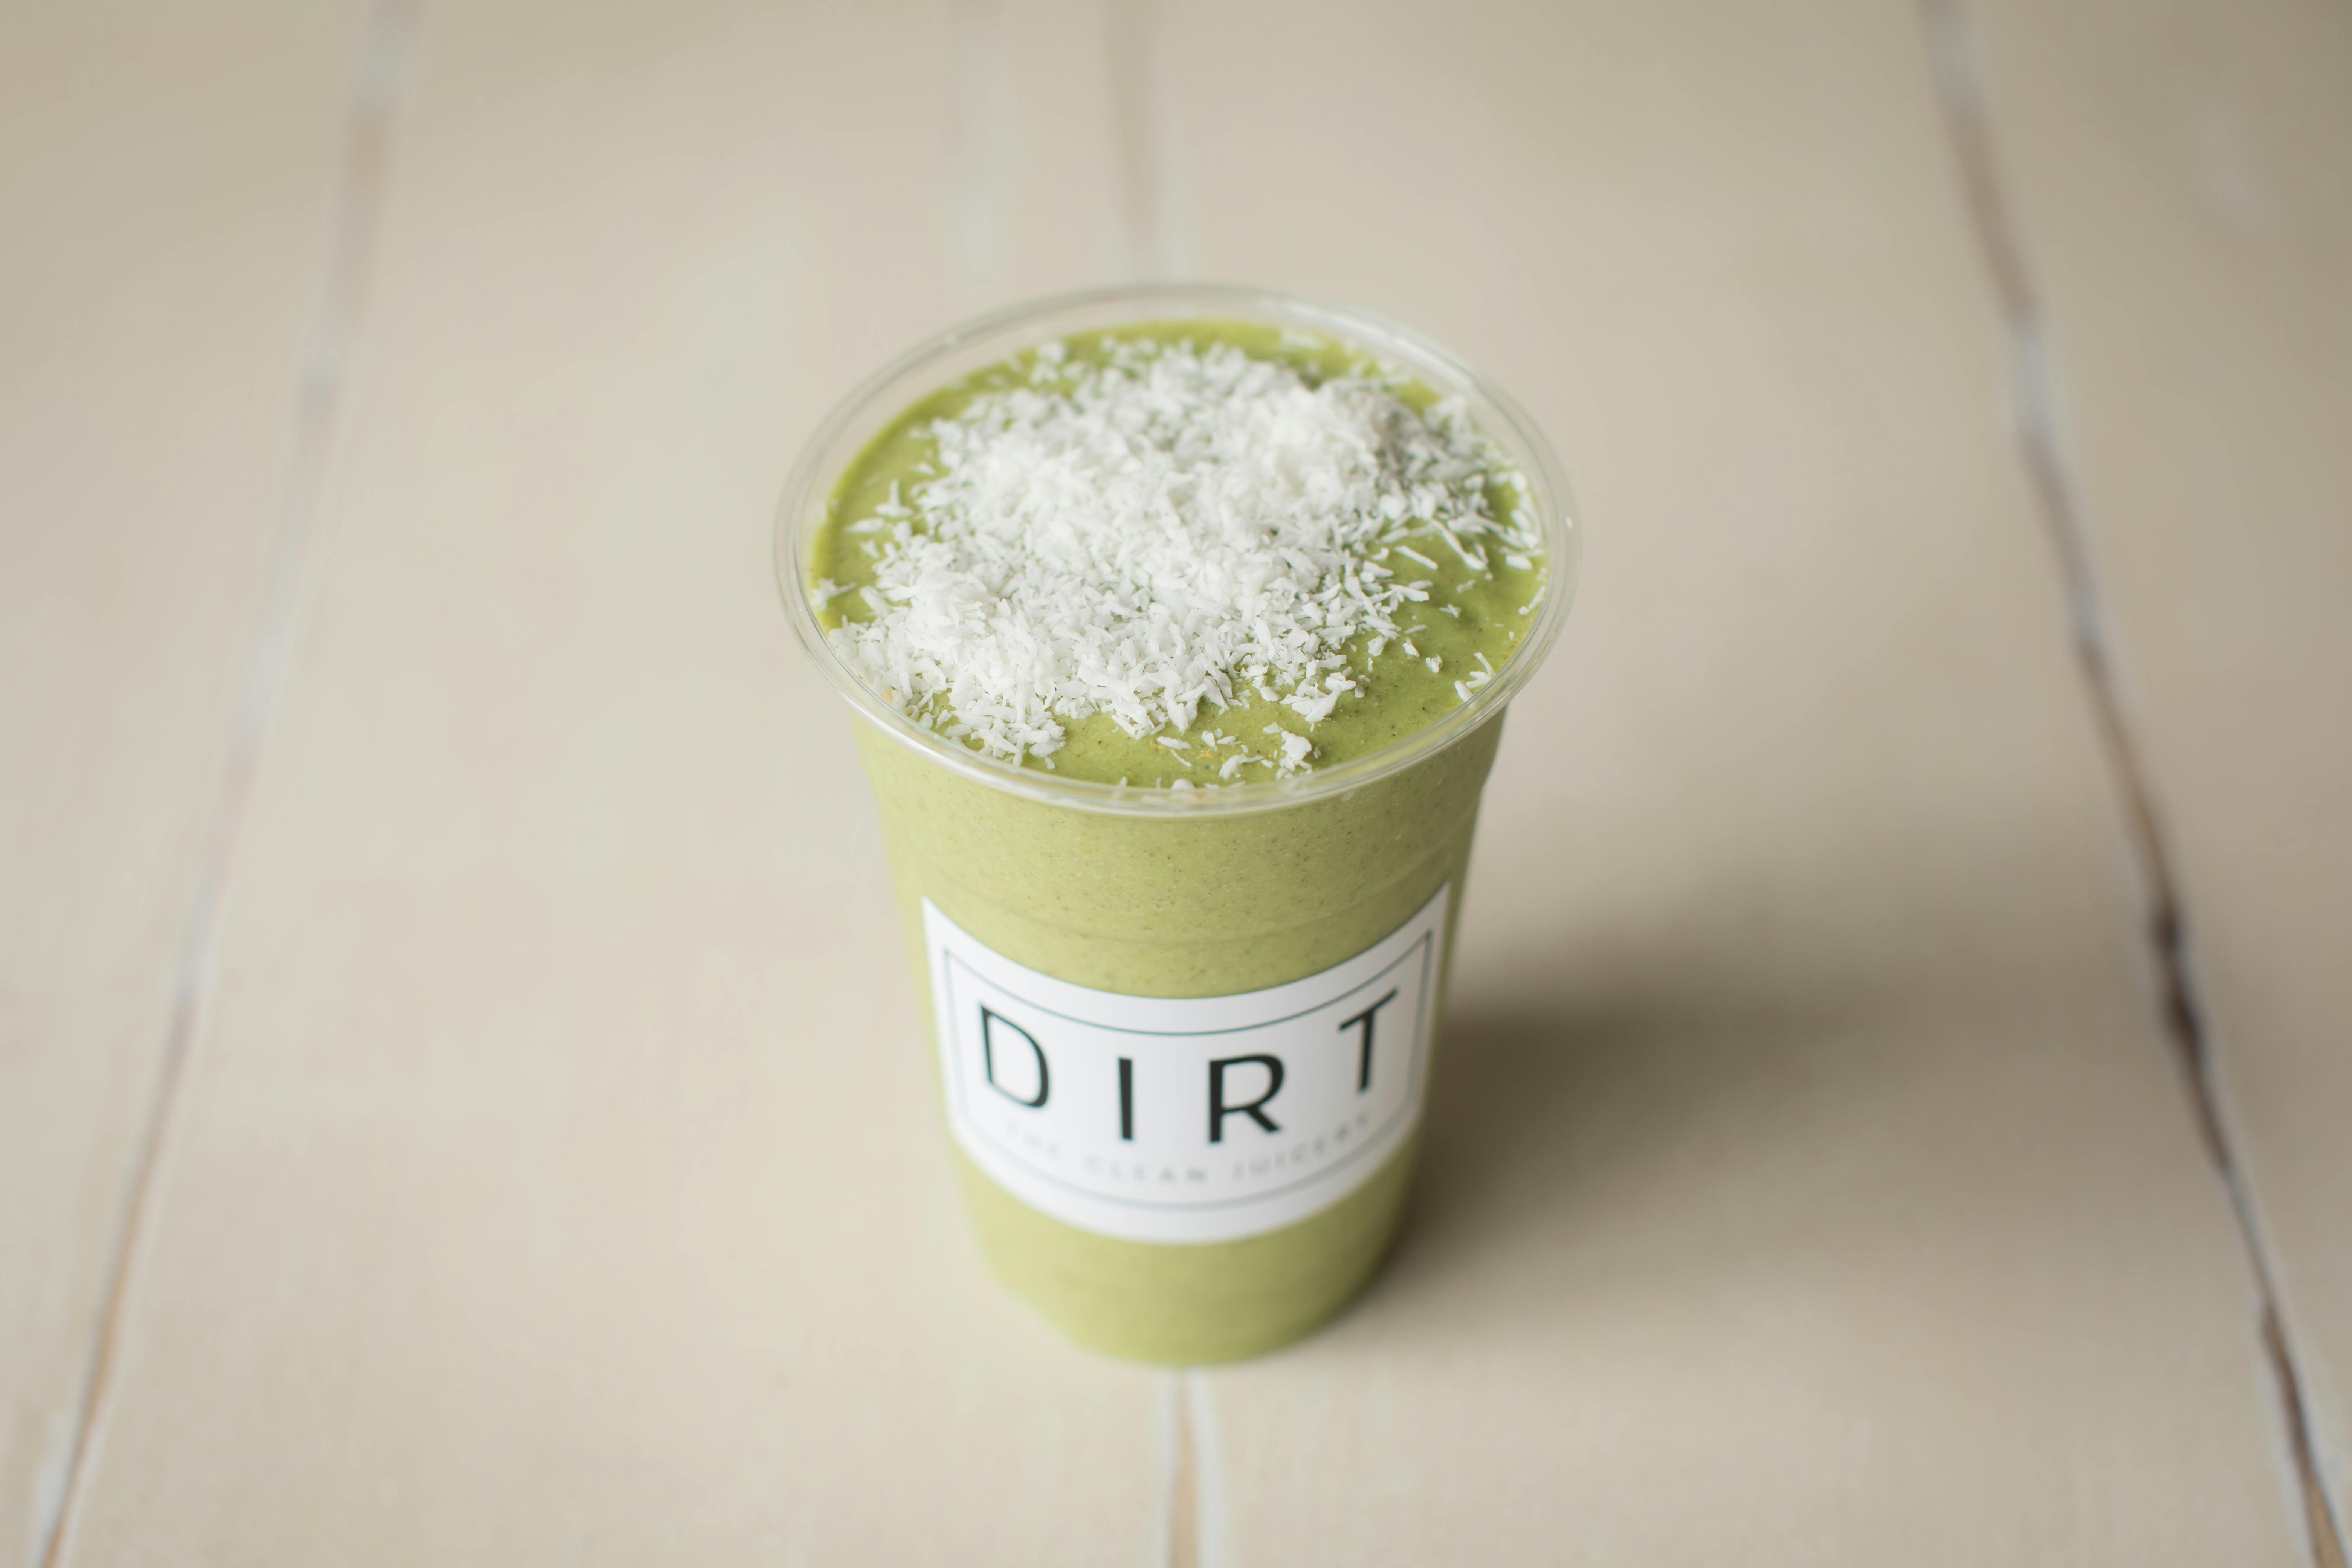 Pina "Kale"ada from Dirt Juicery - Lineville Rd in Green Bay, WI